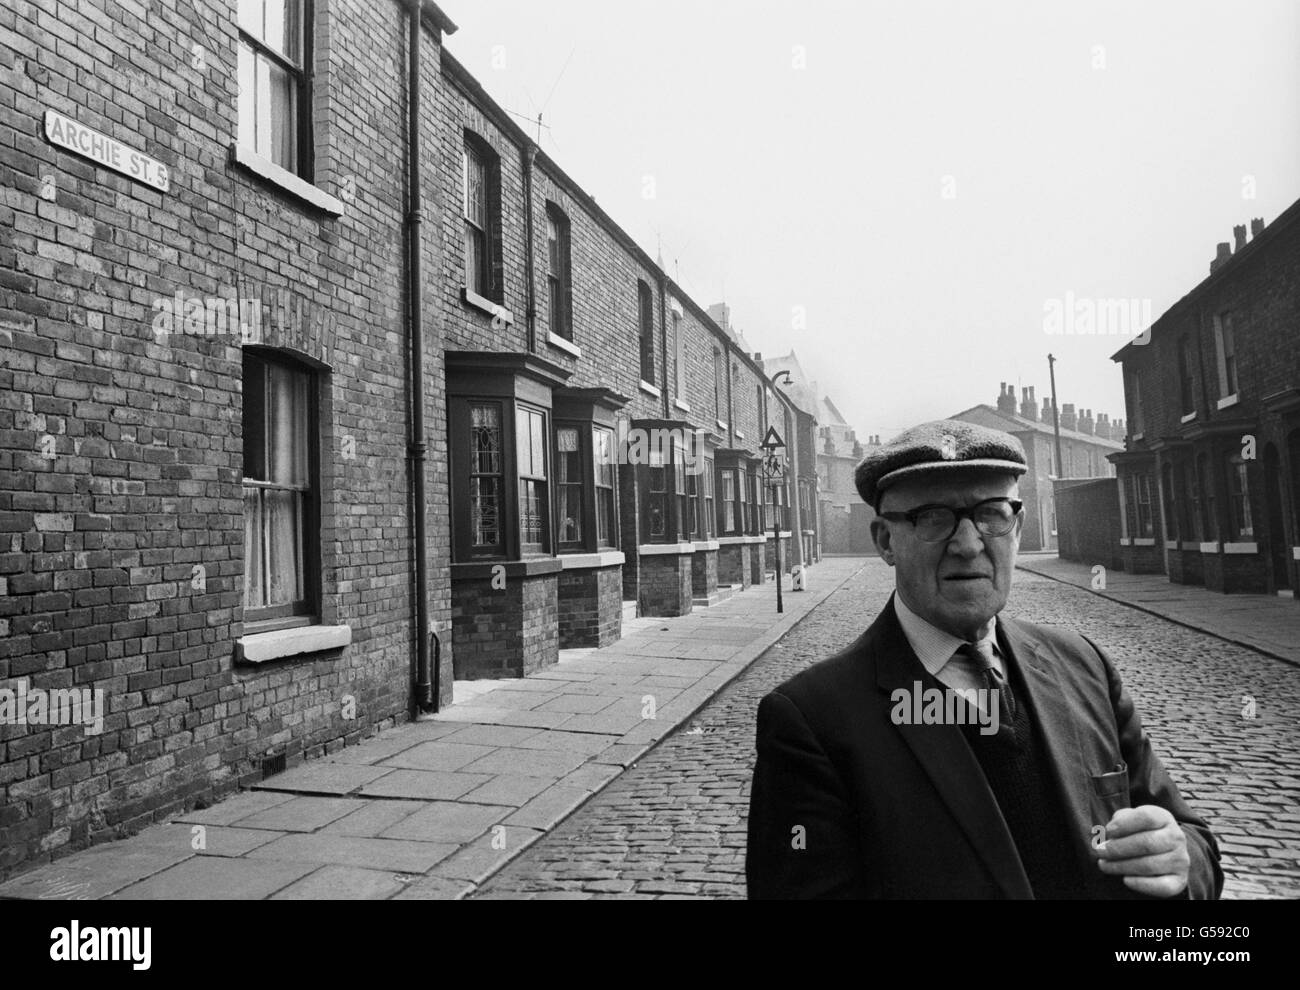 Alf Kirvin, aged 74, who lives in Archie Street, Salford in Lancashire. The street inspired the setting of television soap opera Coronation Street, which designers reproduced for the TV studios. Stock Photo